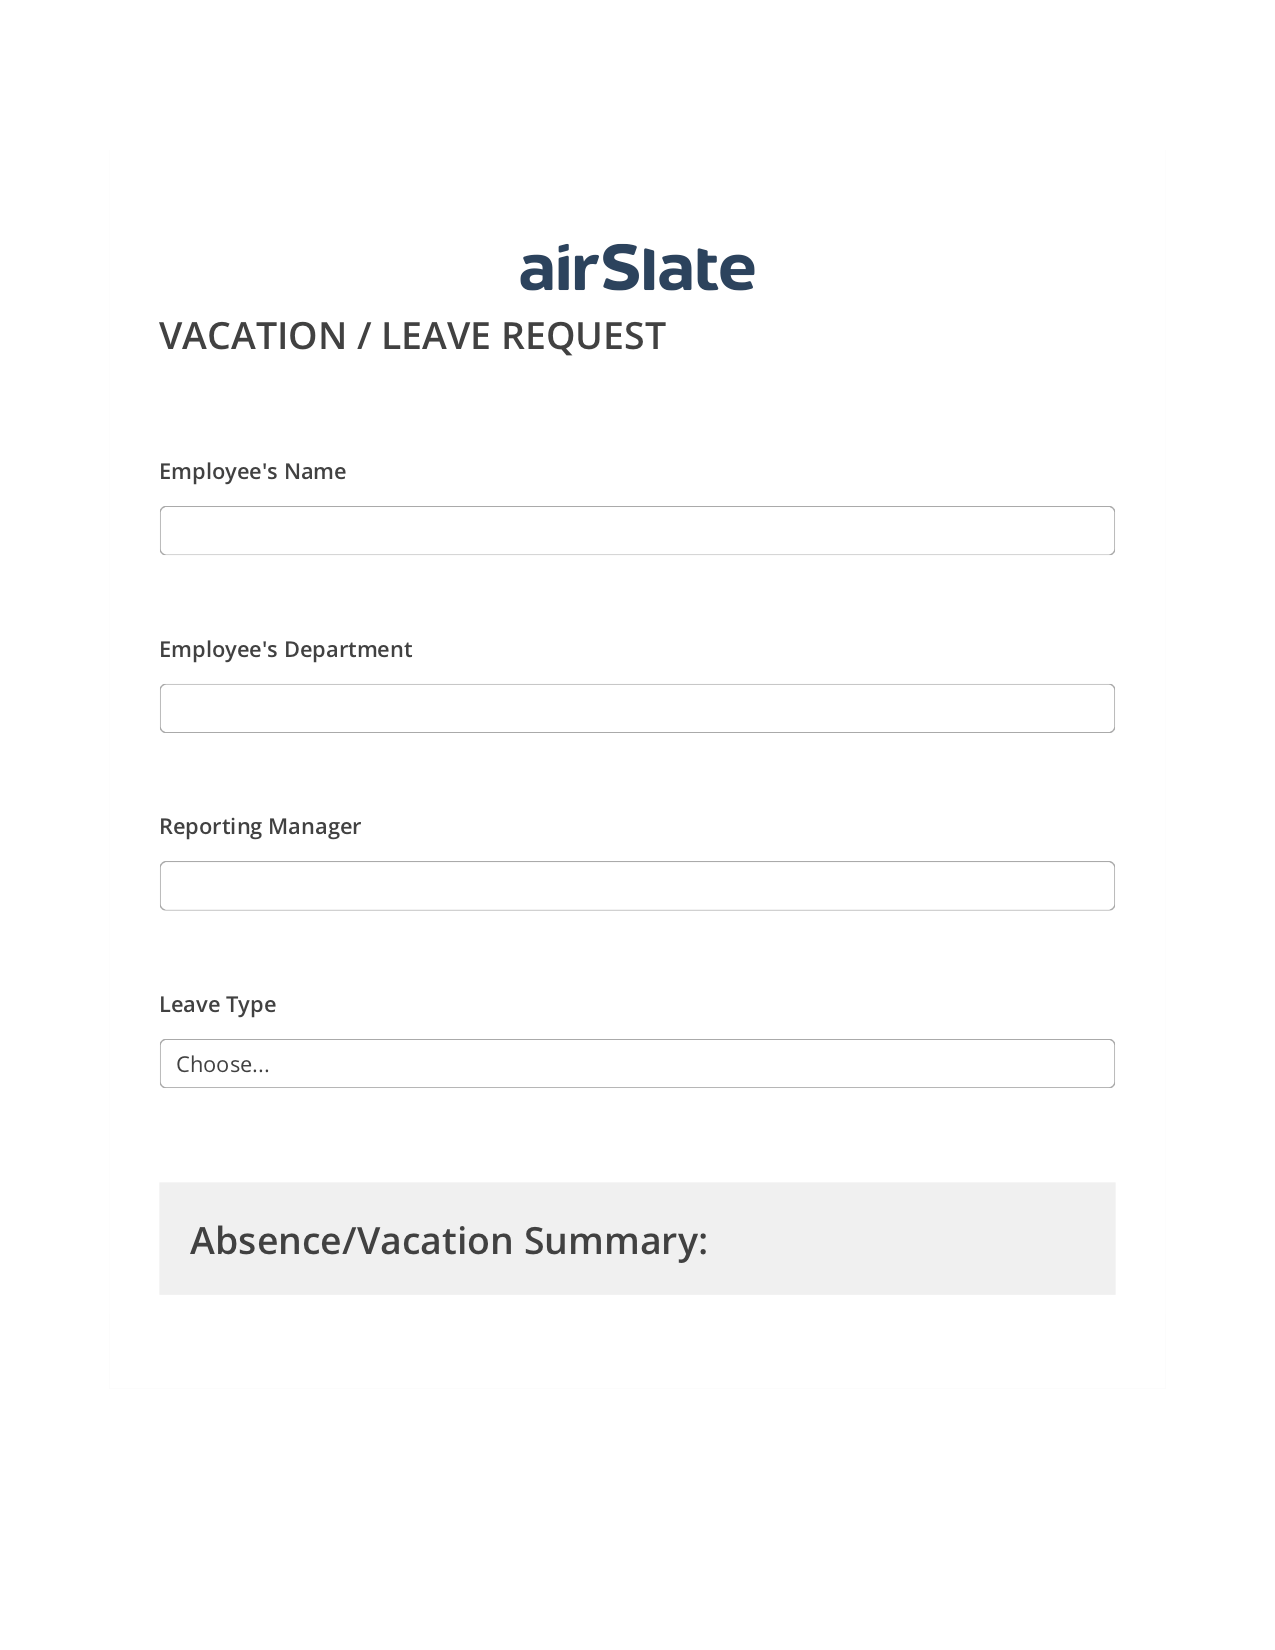 Multirole Vacation/Leave Request Workflow Pre-fill from Google Sheets Bot, Unassign Role Bot, Export to Salesforce Record Bot